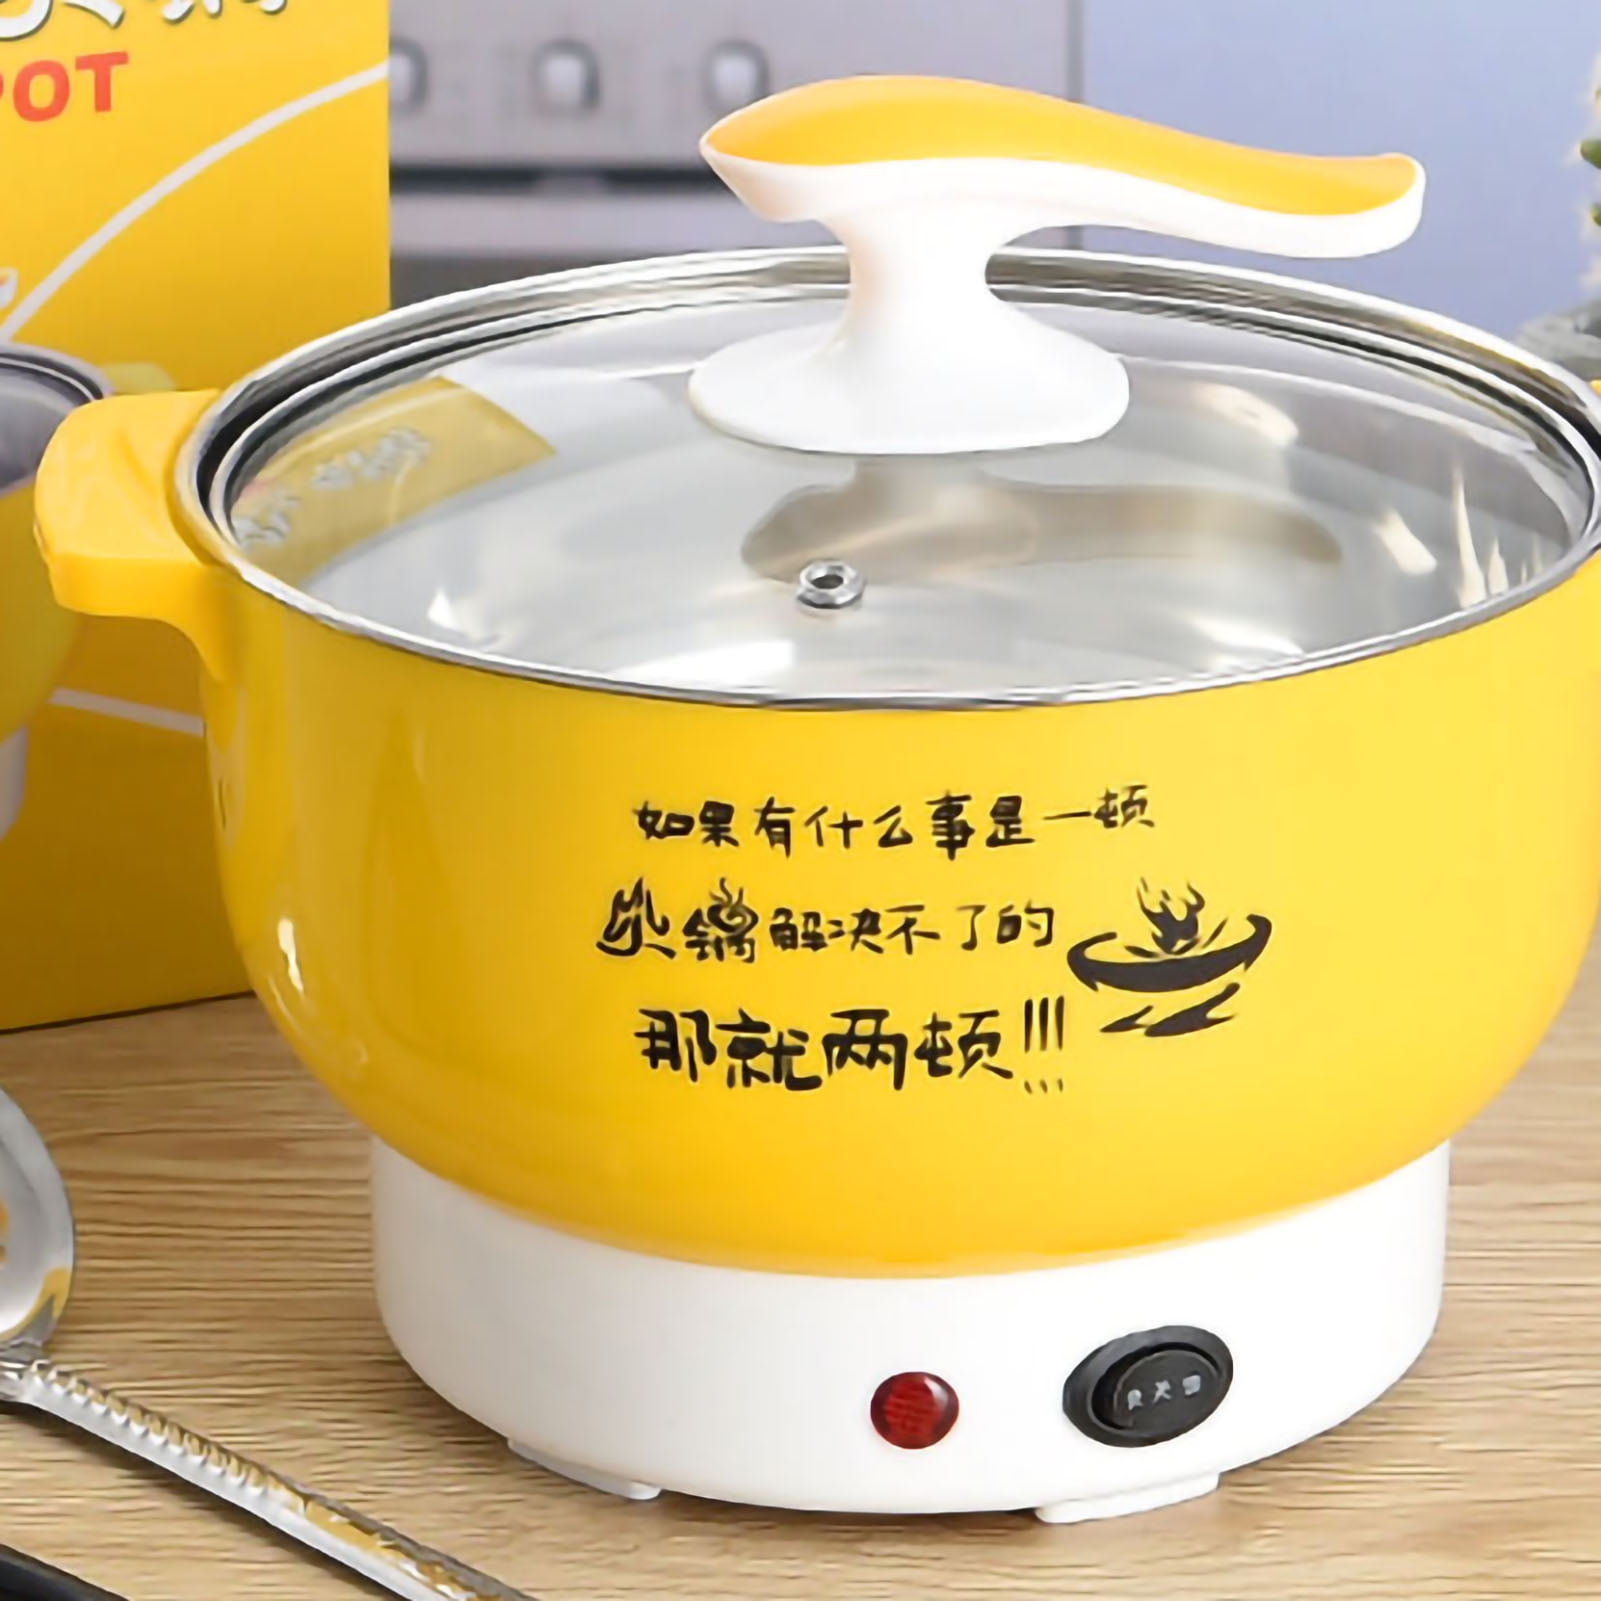 Electric Cooking Pot Electric Pot Mini Hot Pot Hot Pot Electric Cooking Pot 1.8L 400 to 800W Stainless Steel Inner Wall 2 Modes Overheating Protection